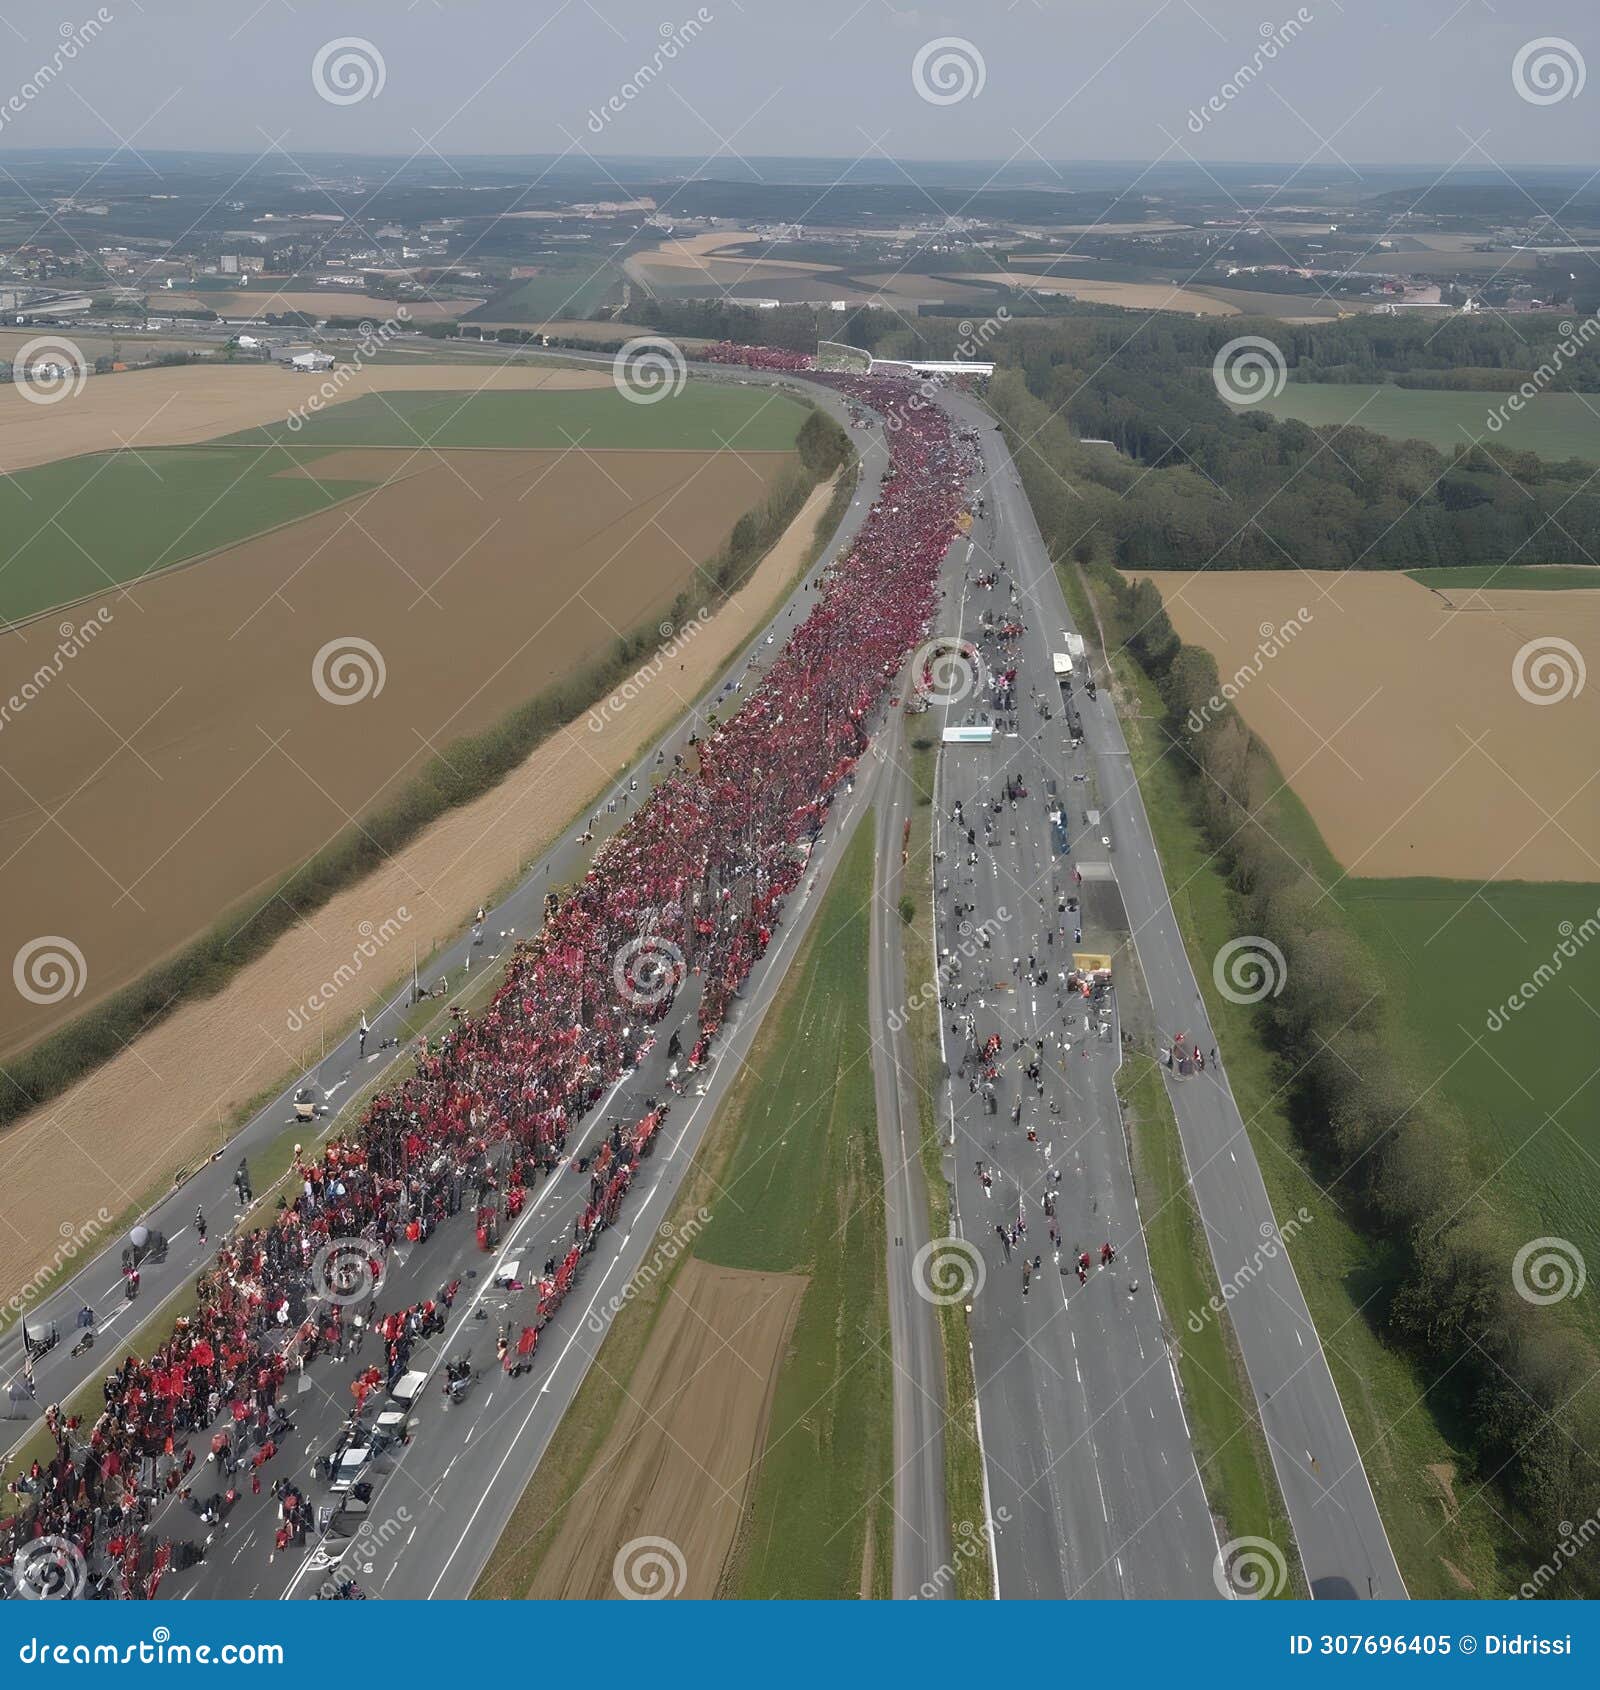 throughout the nationwide farmer protests in germany, access roads to the motorway were blocked.